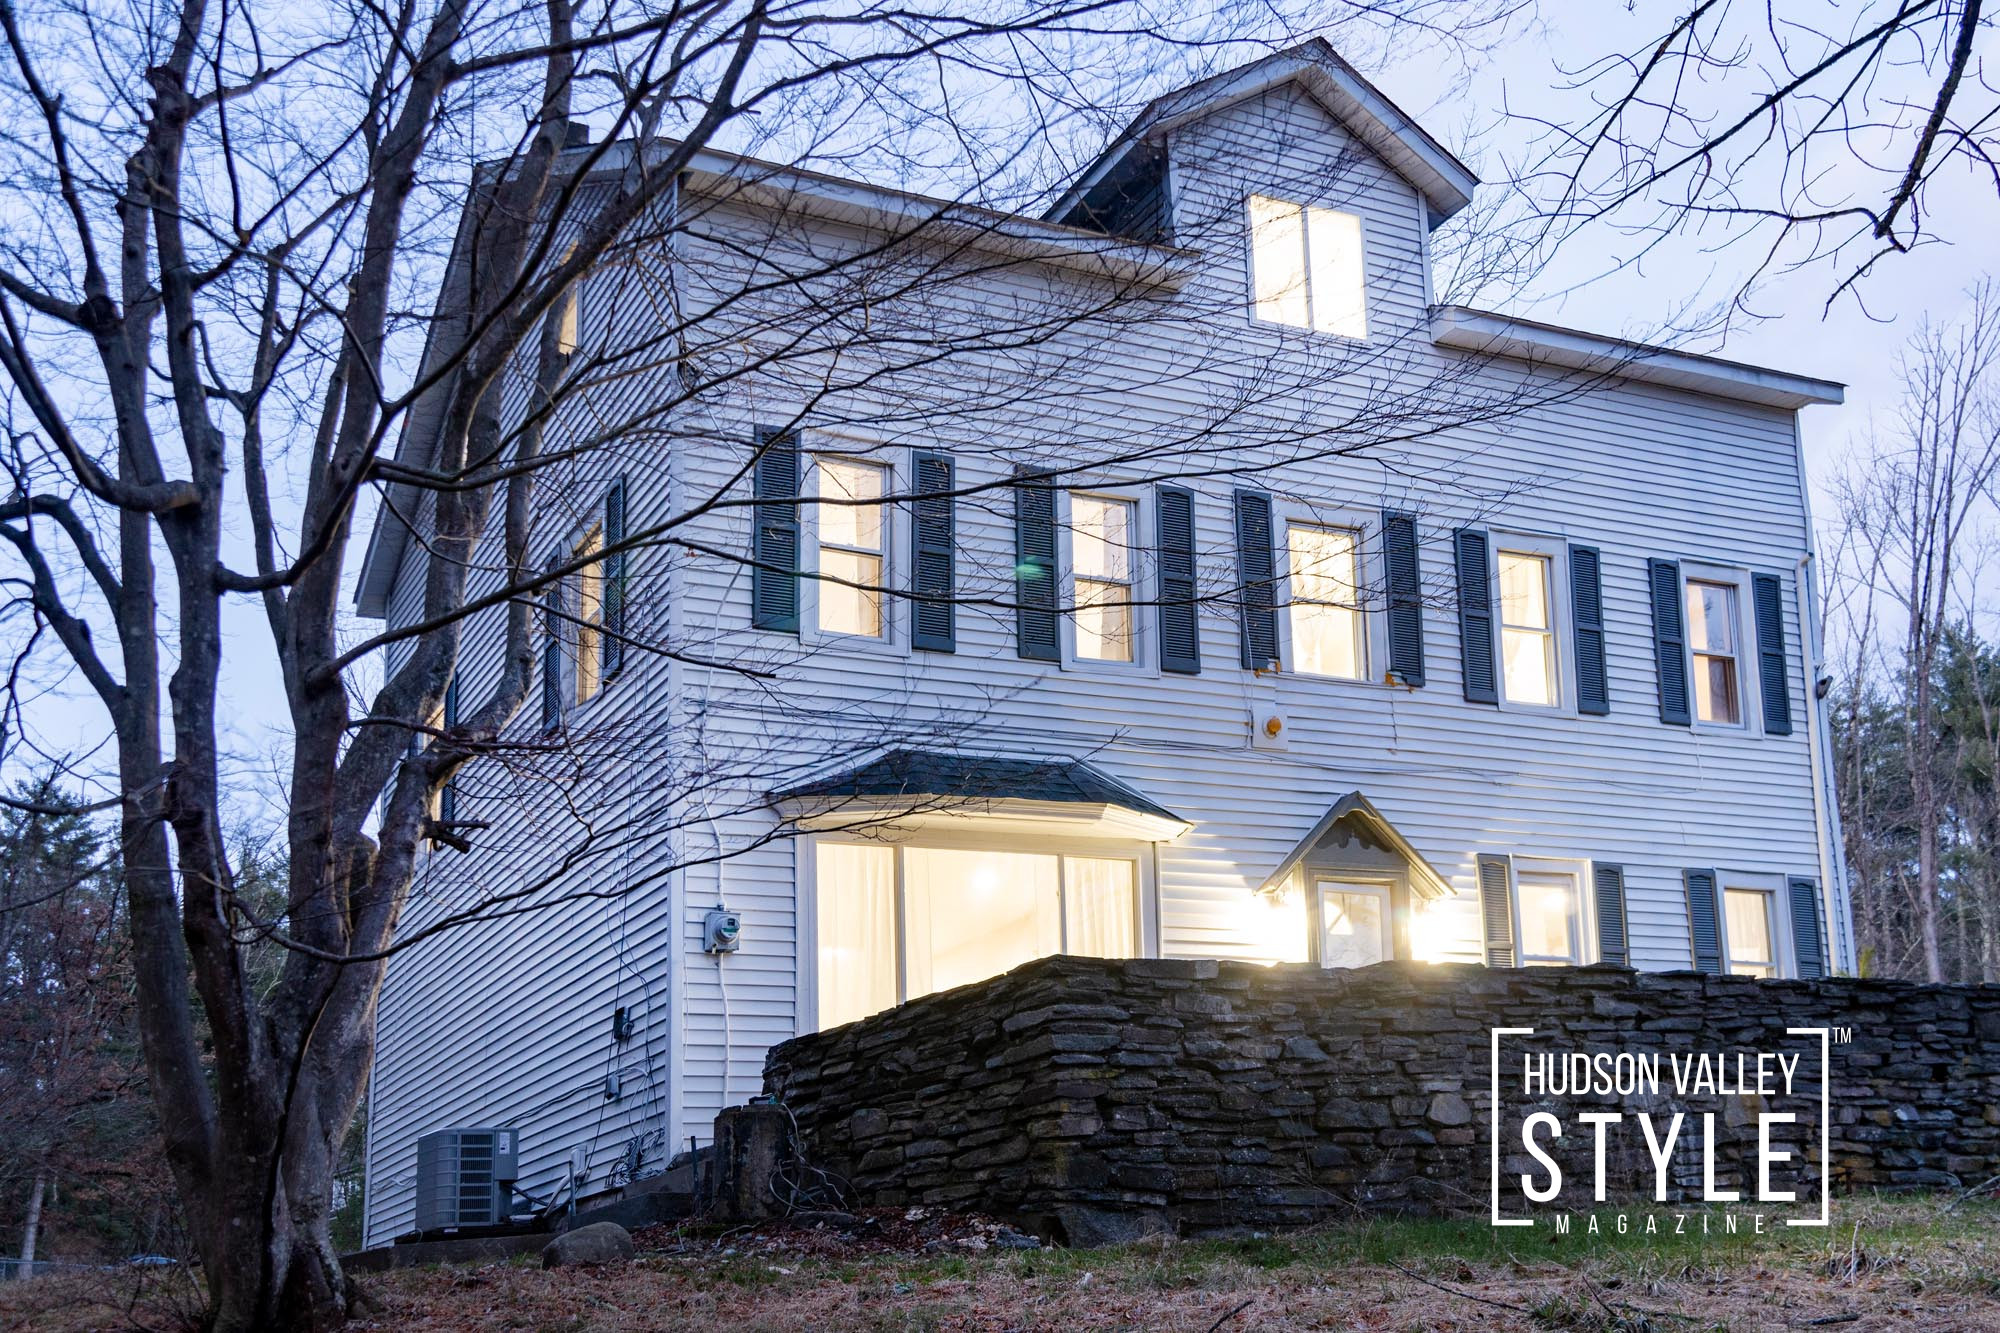 The King of the Hill – Farmhouse for Sale in the Catskill Mountains – Home for Sale: 62 Eden Road, Cuddebackville, NY 12729 – Listed for $550,000 / Listing by ALLUVION Real Estate / Listing Agent: Xiomara Marrero – Text or Call: 845-797-5070 – Photography by ALLUVION MEDIA